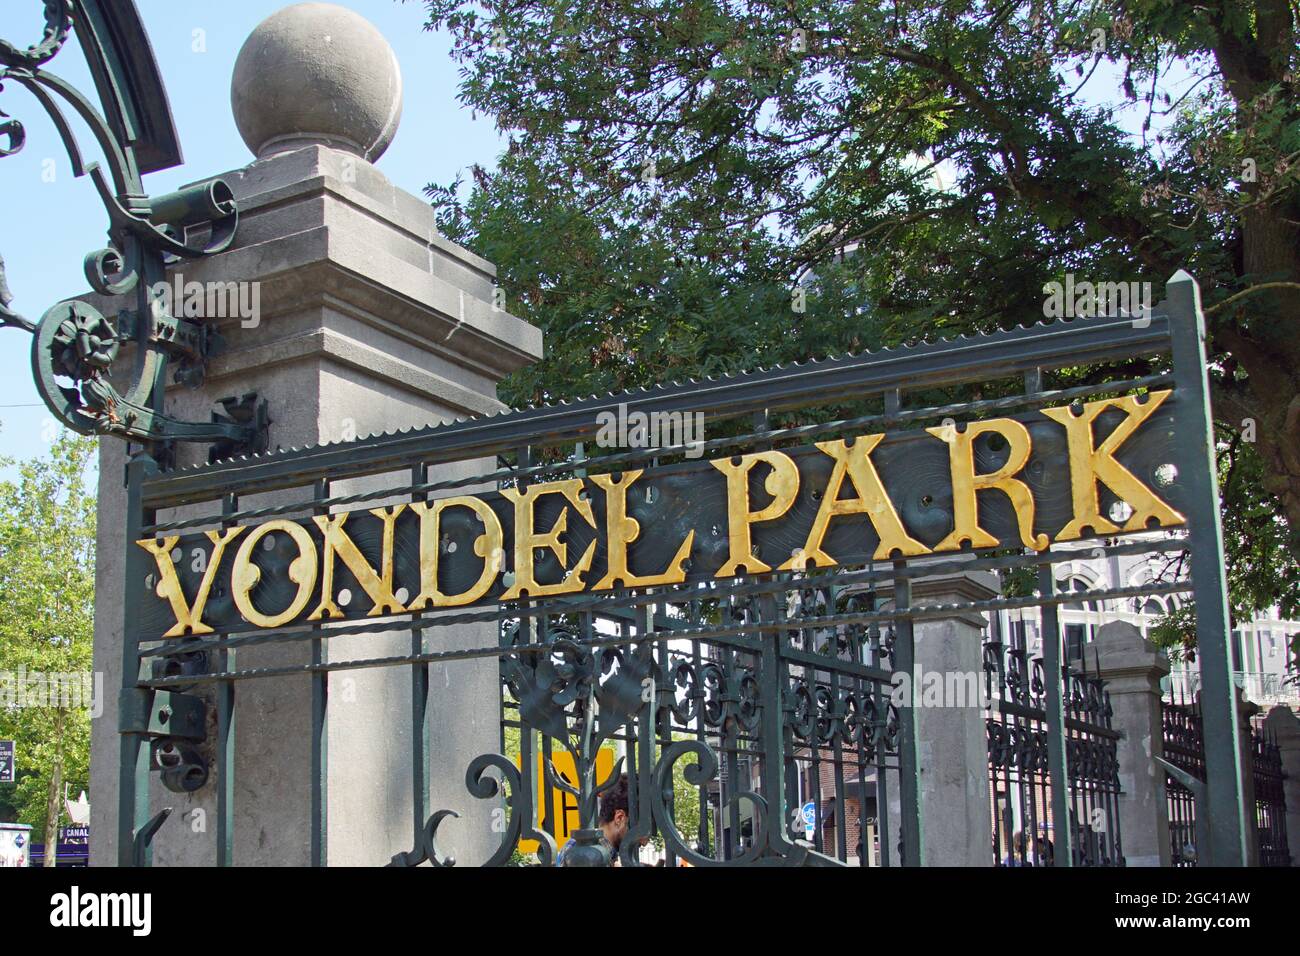 Amsterdam, the Netherland - August 4, 2021: Gate entrance sign The Vondelpark, a public urban park in the center of the Dutch capitol Amsterdam. Stock Photo